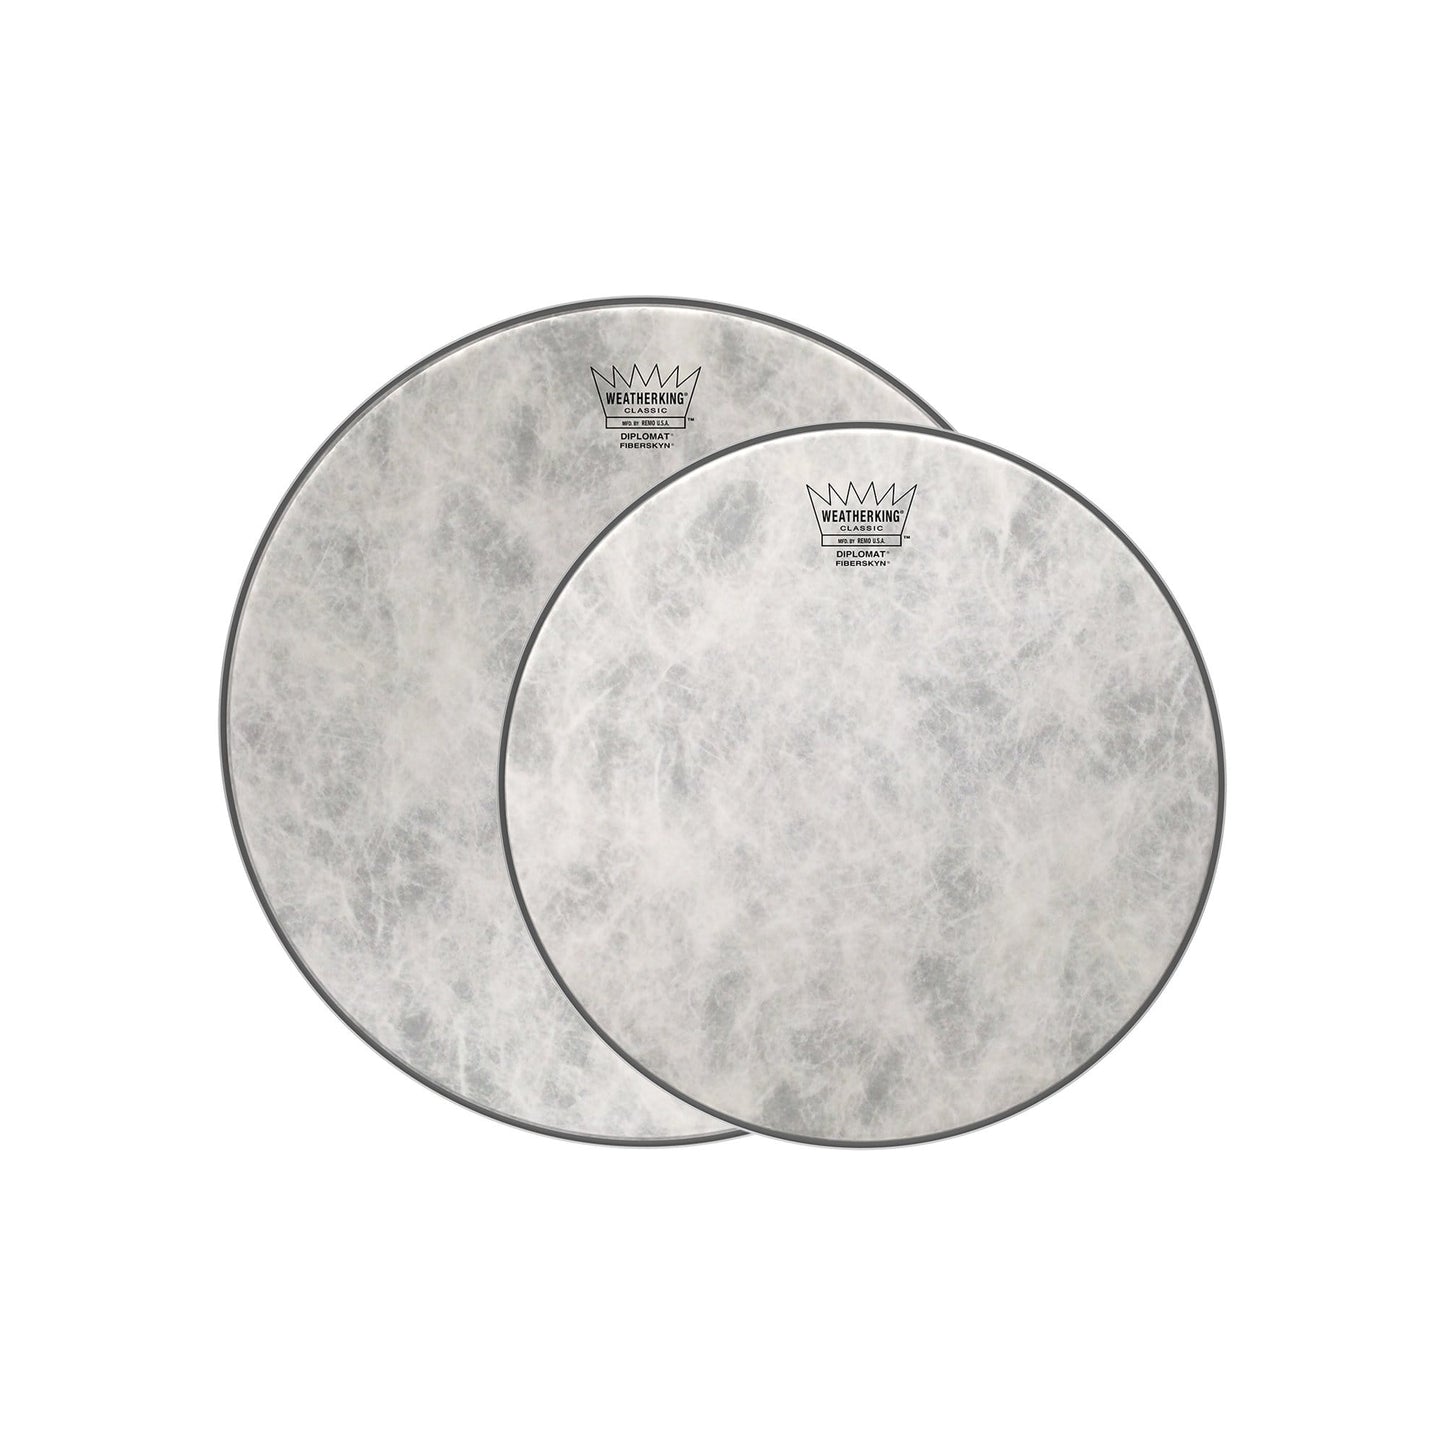 Remo 12/14" Fiberskyn Diplomat Classic Drumhead (2 Pack Bundle) Drums and Percussion / Parts and Accessories / Heads